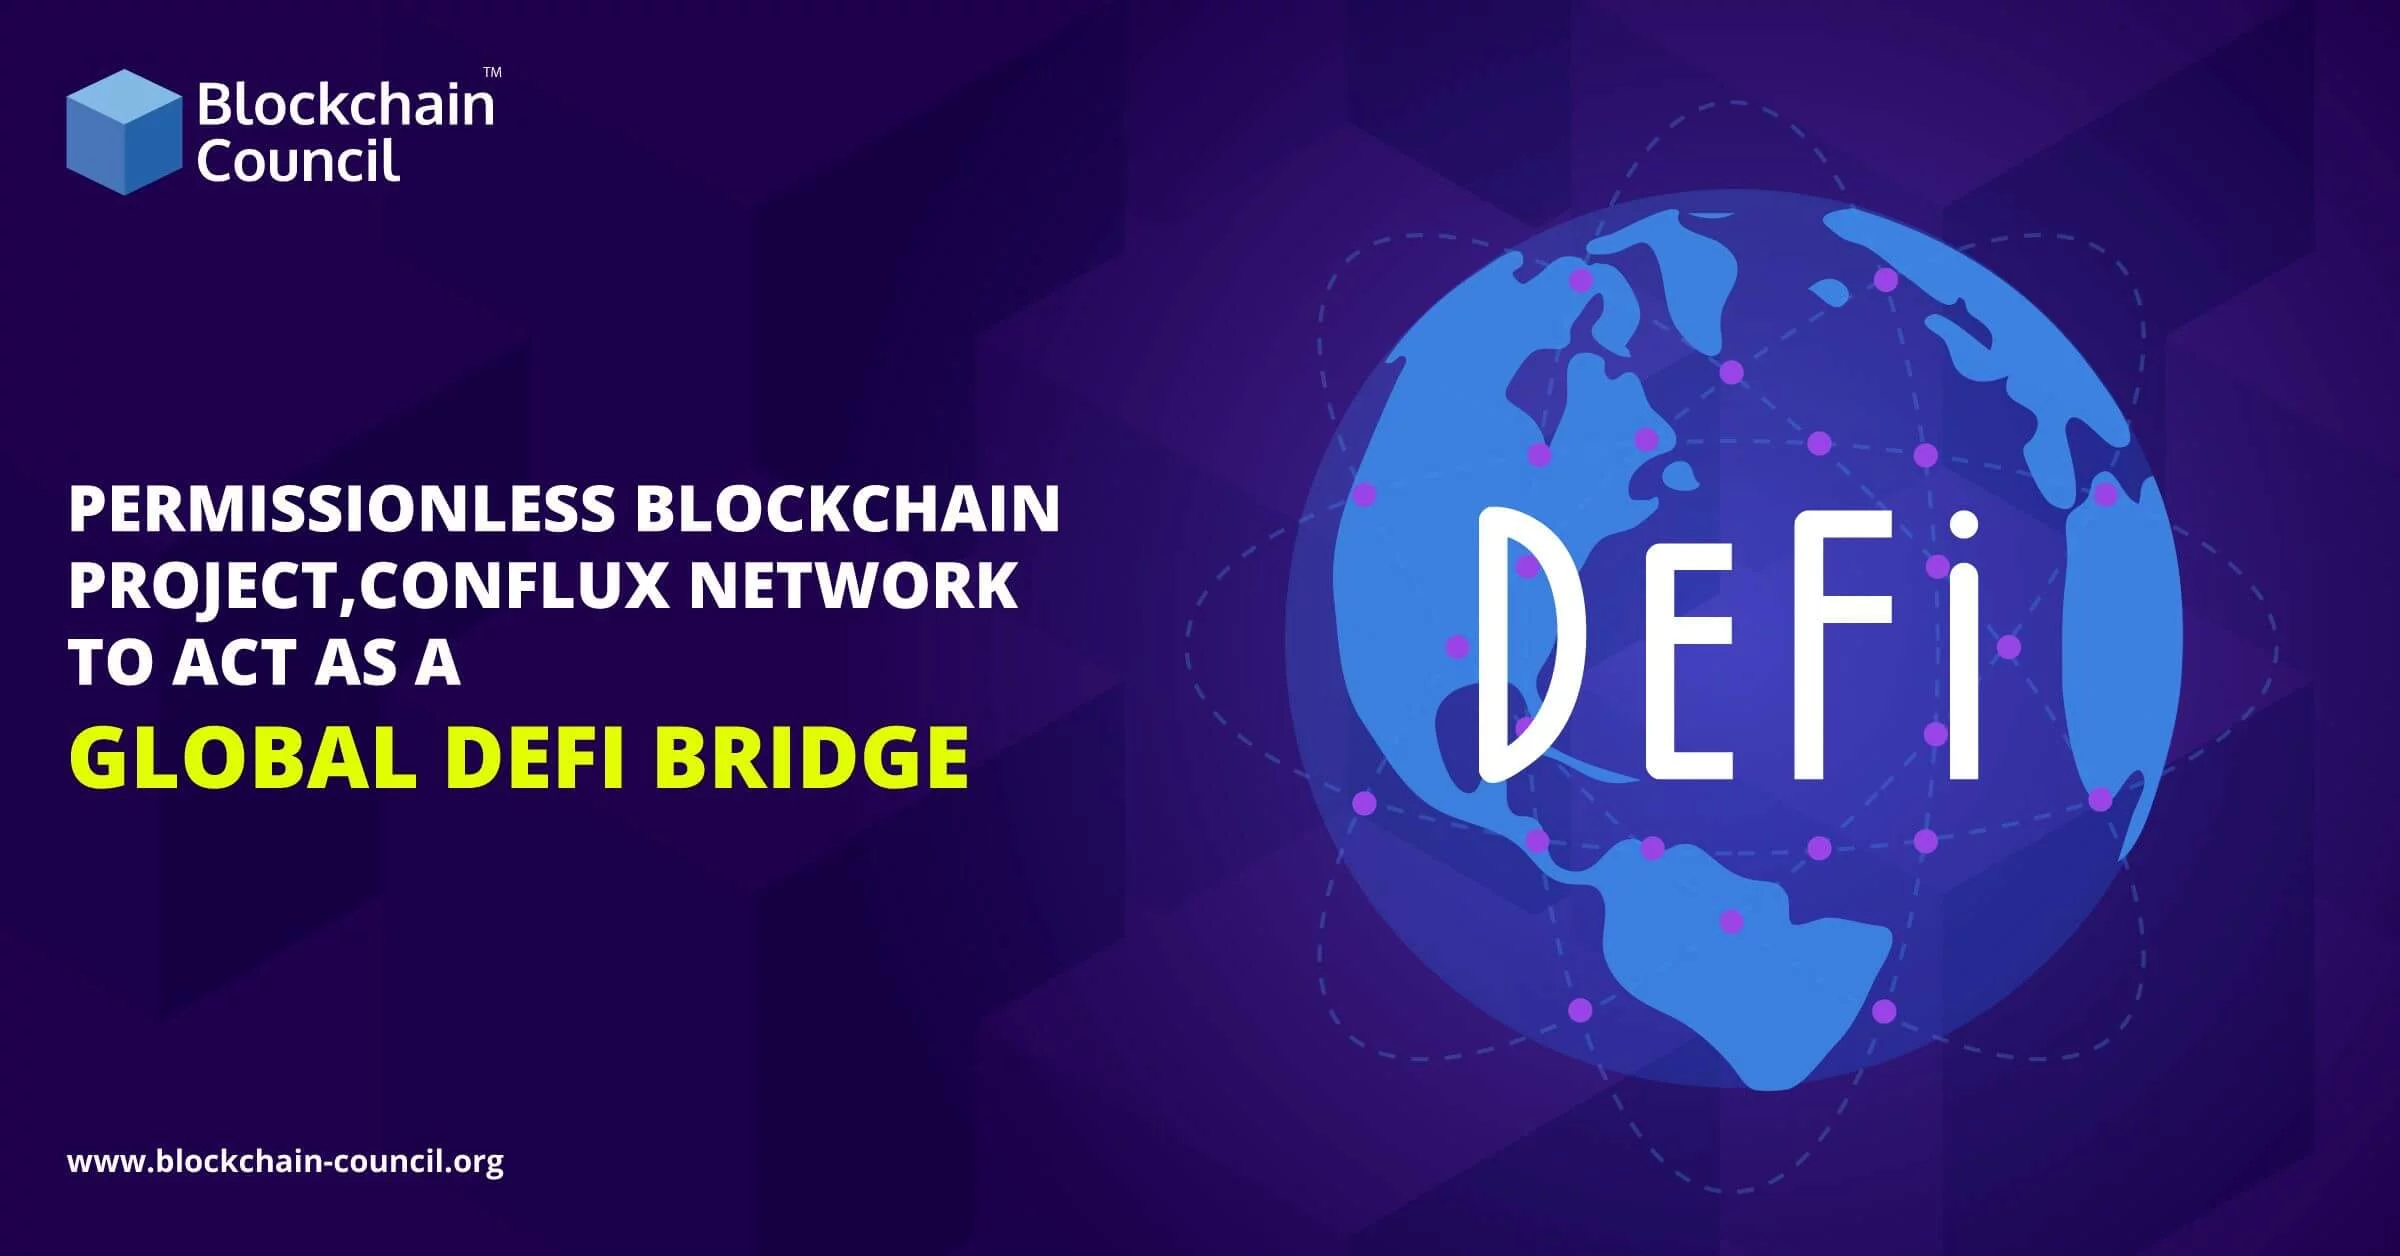 Permissionless-Blockchain-Project,Conflux-Network- to-Act-as-a Globa -DeFi-Bridge